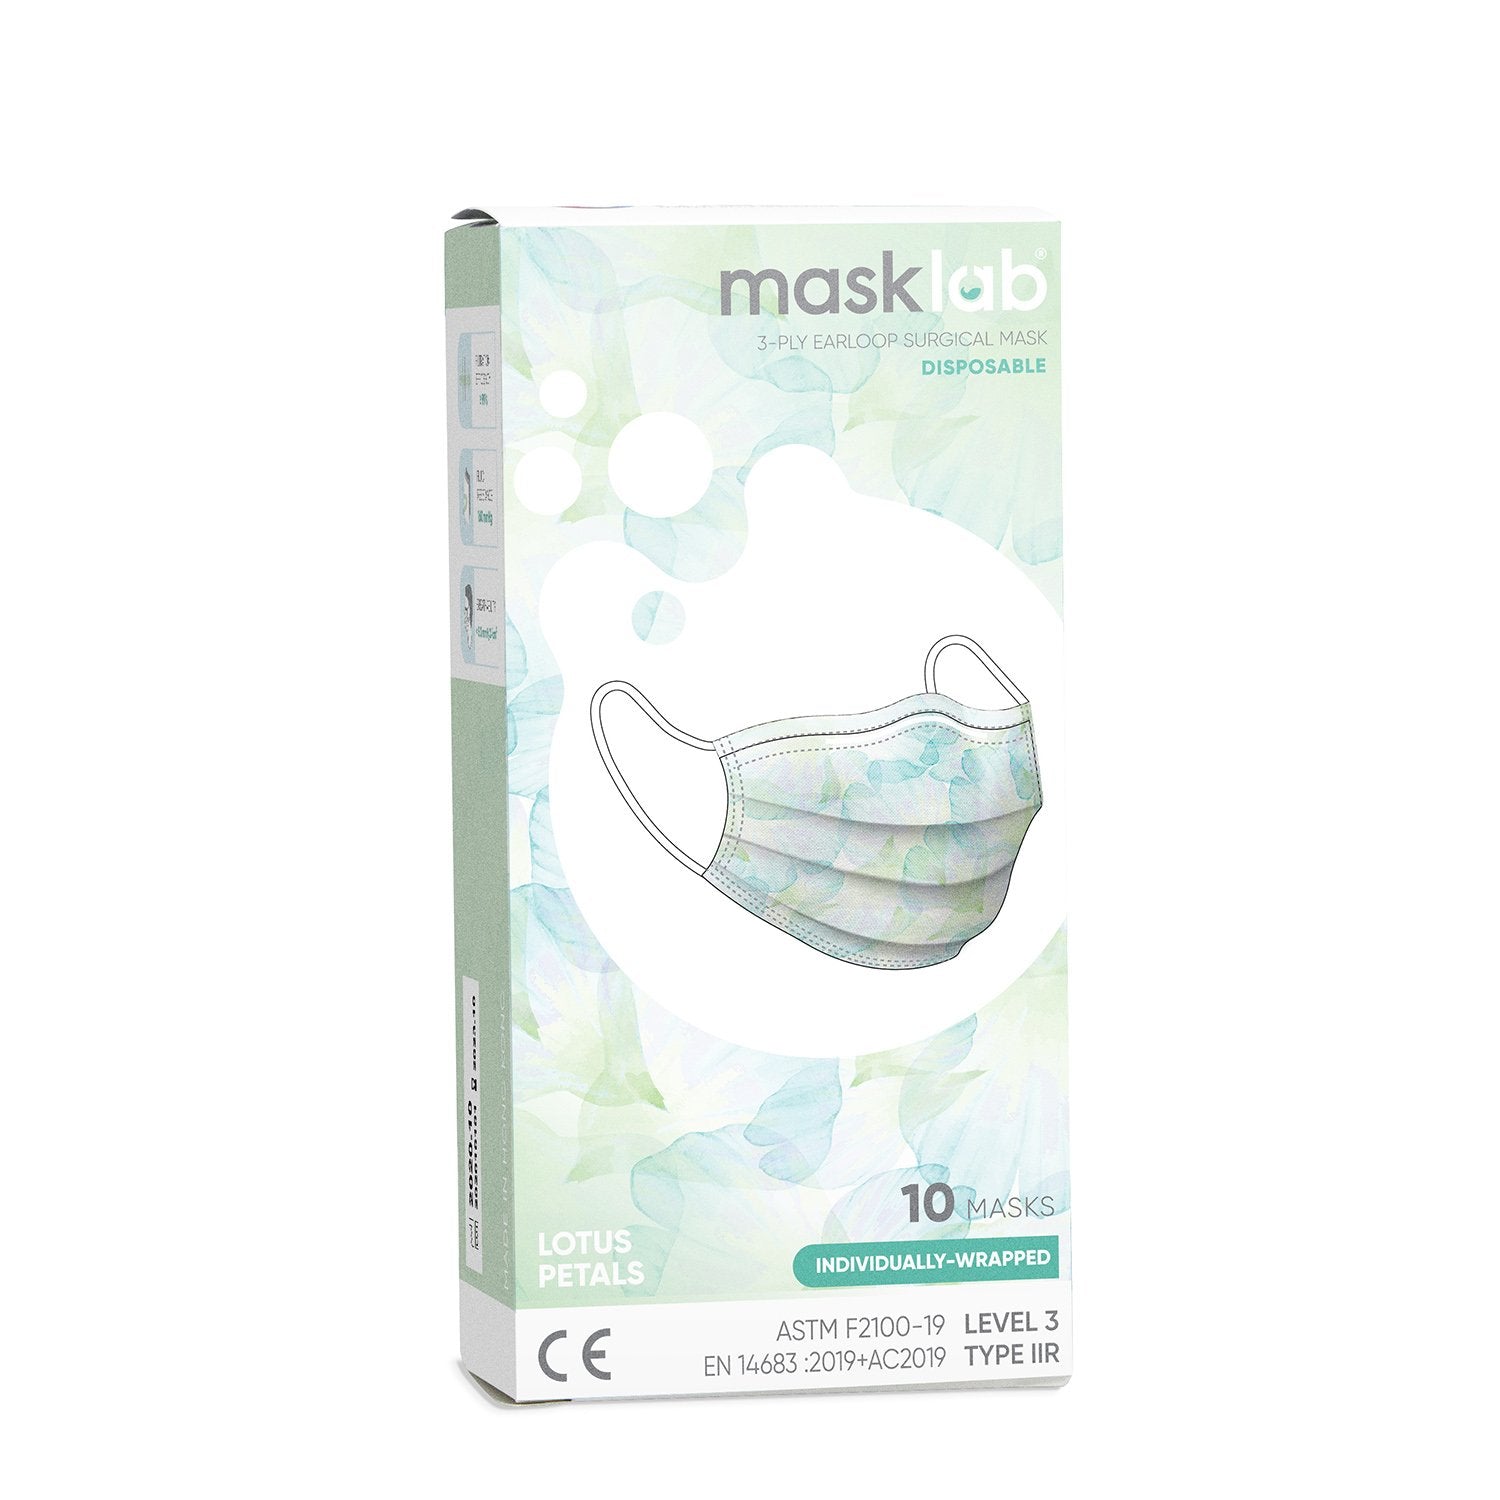 masklab™ Lotus Petals Adult 3-ply Surgical Mask (Box of 10, Individually-wrapped)